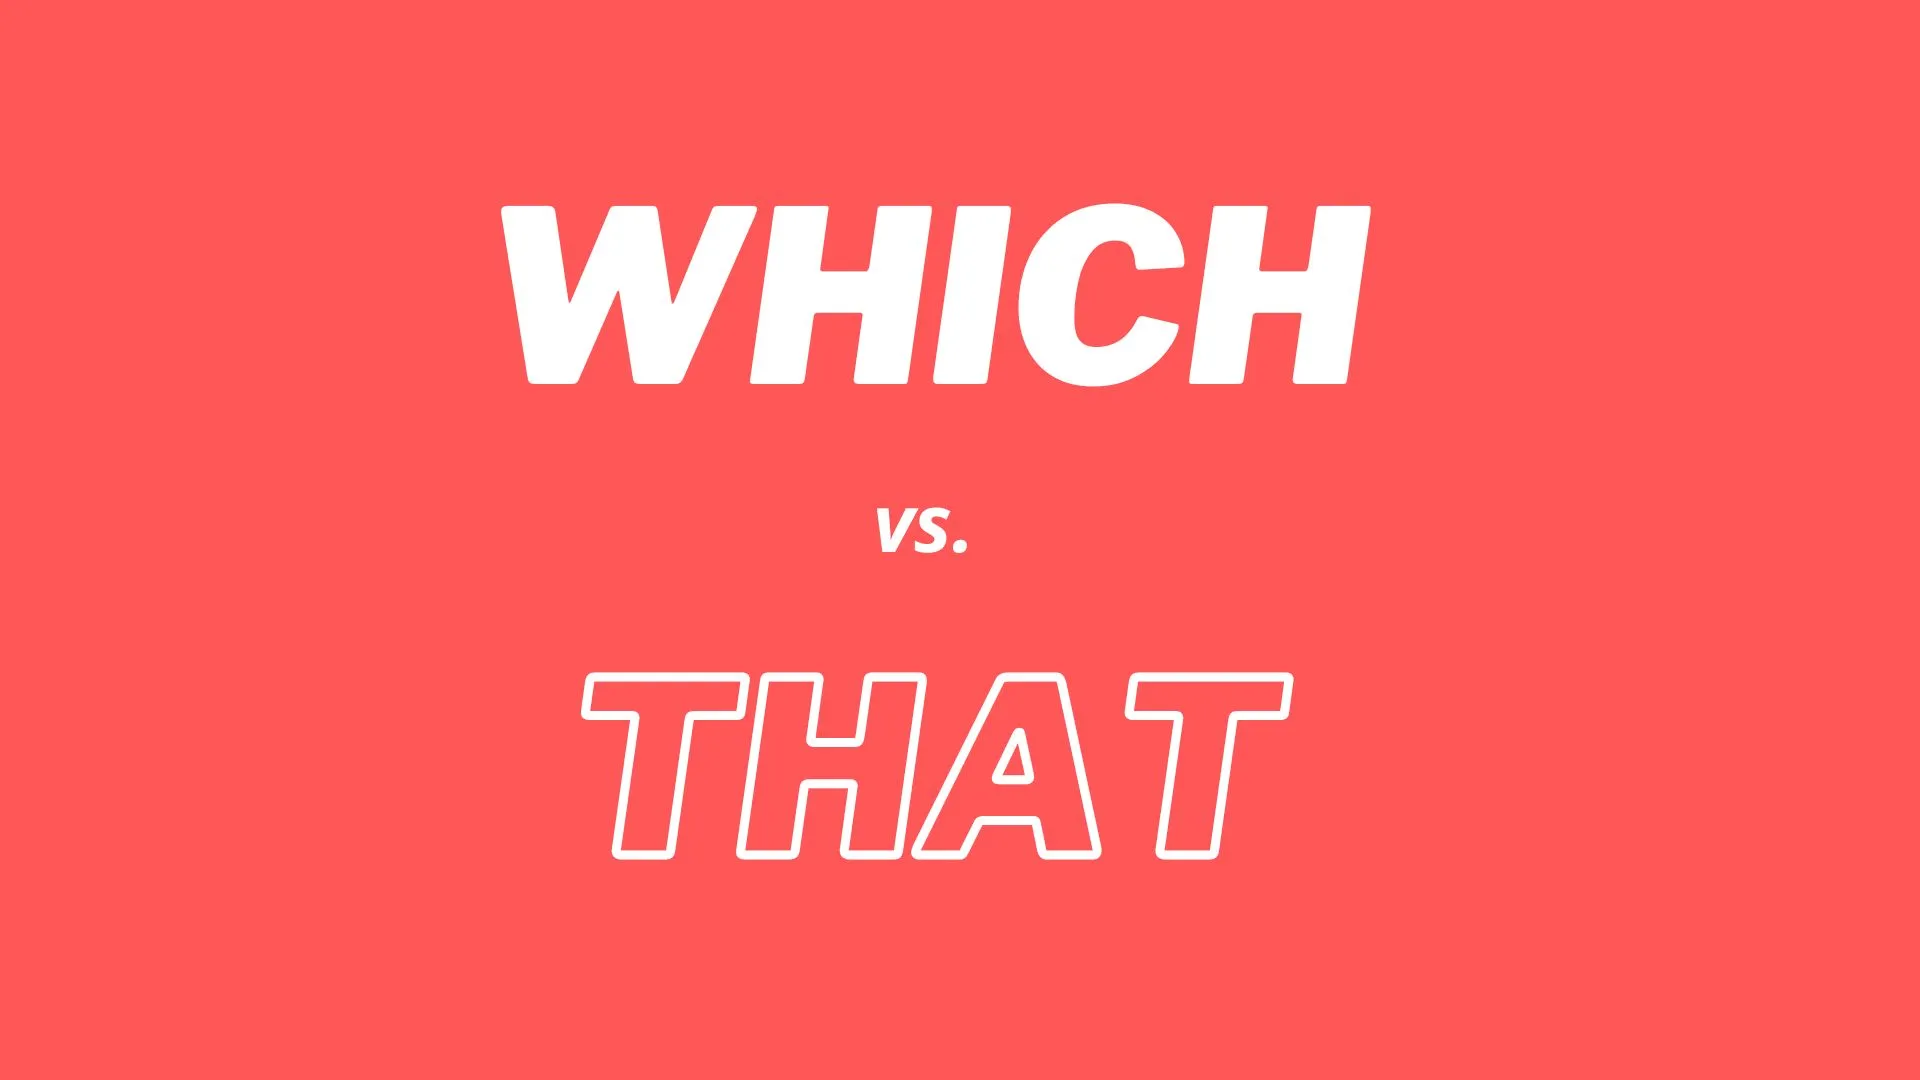 Brief explanation of the difference between "which" and "that" in English grammar usage for English teachers and learners.